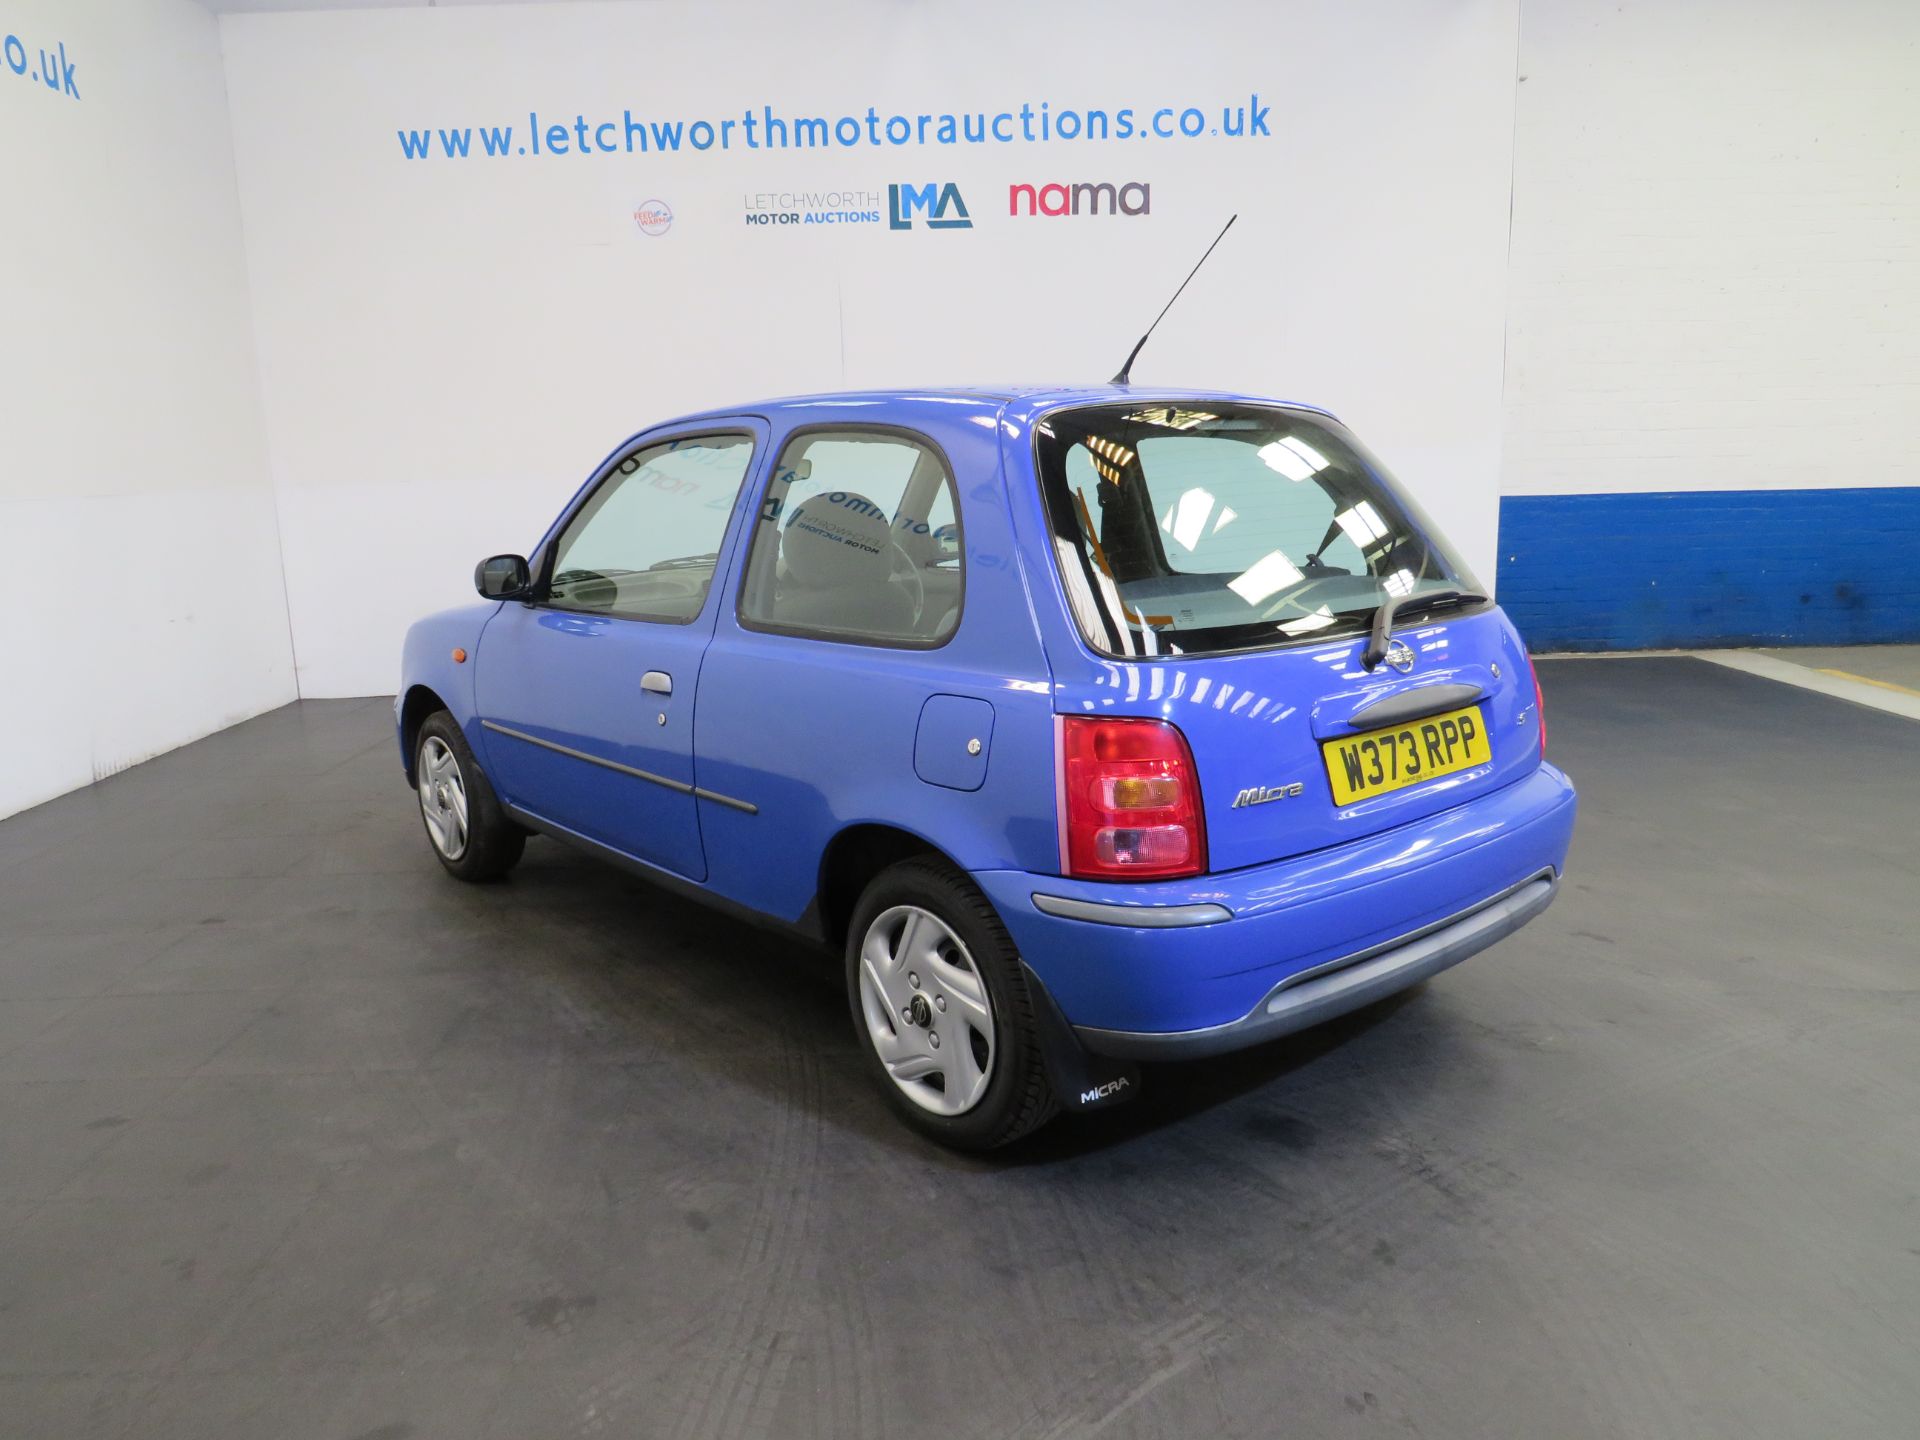 2000 Nissan Micra S - 998cc - Image 4 of 15